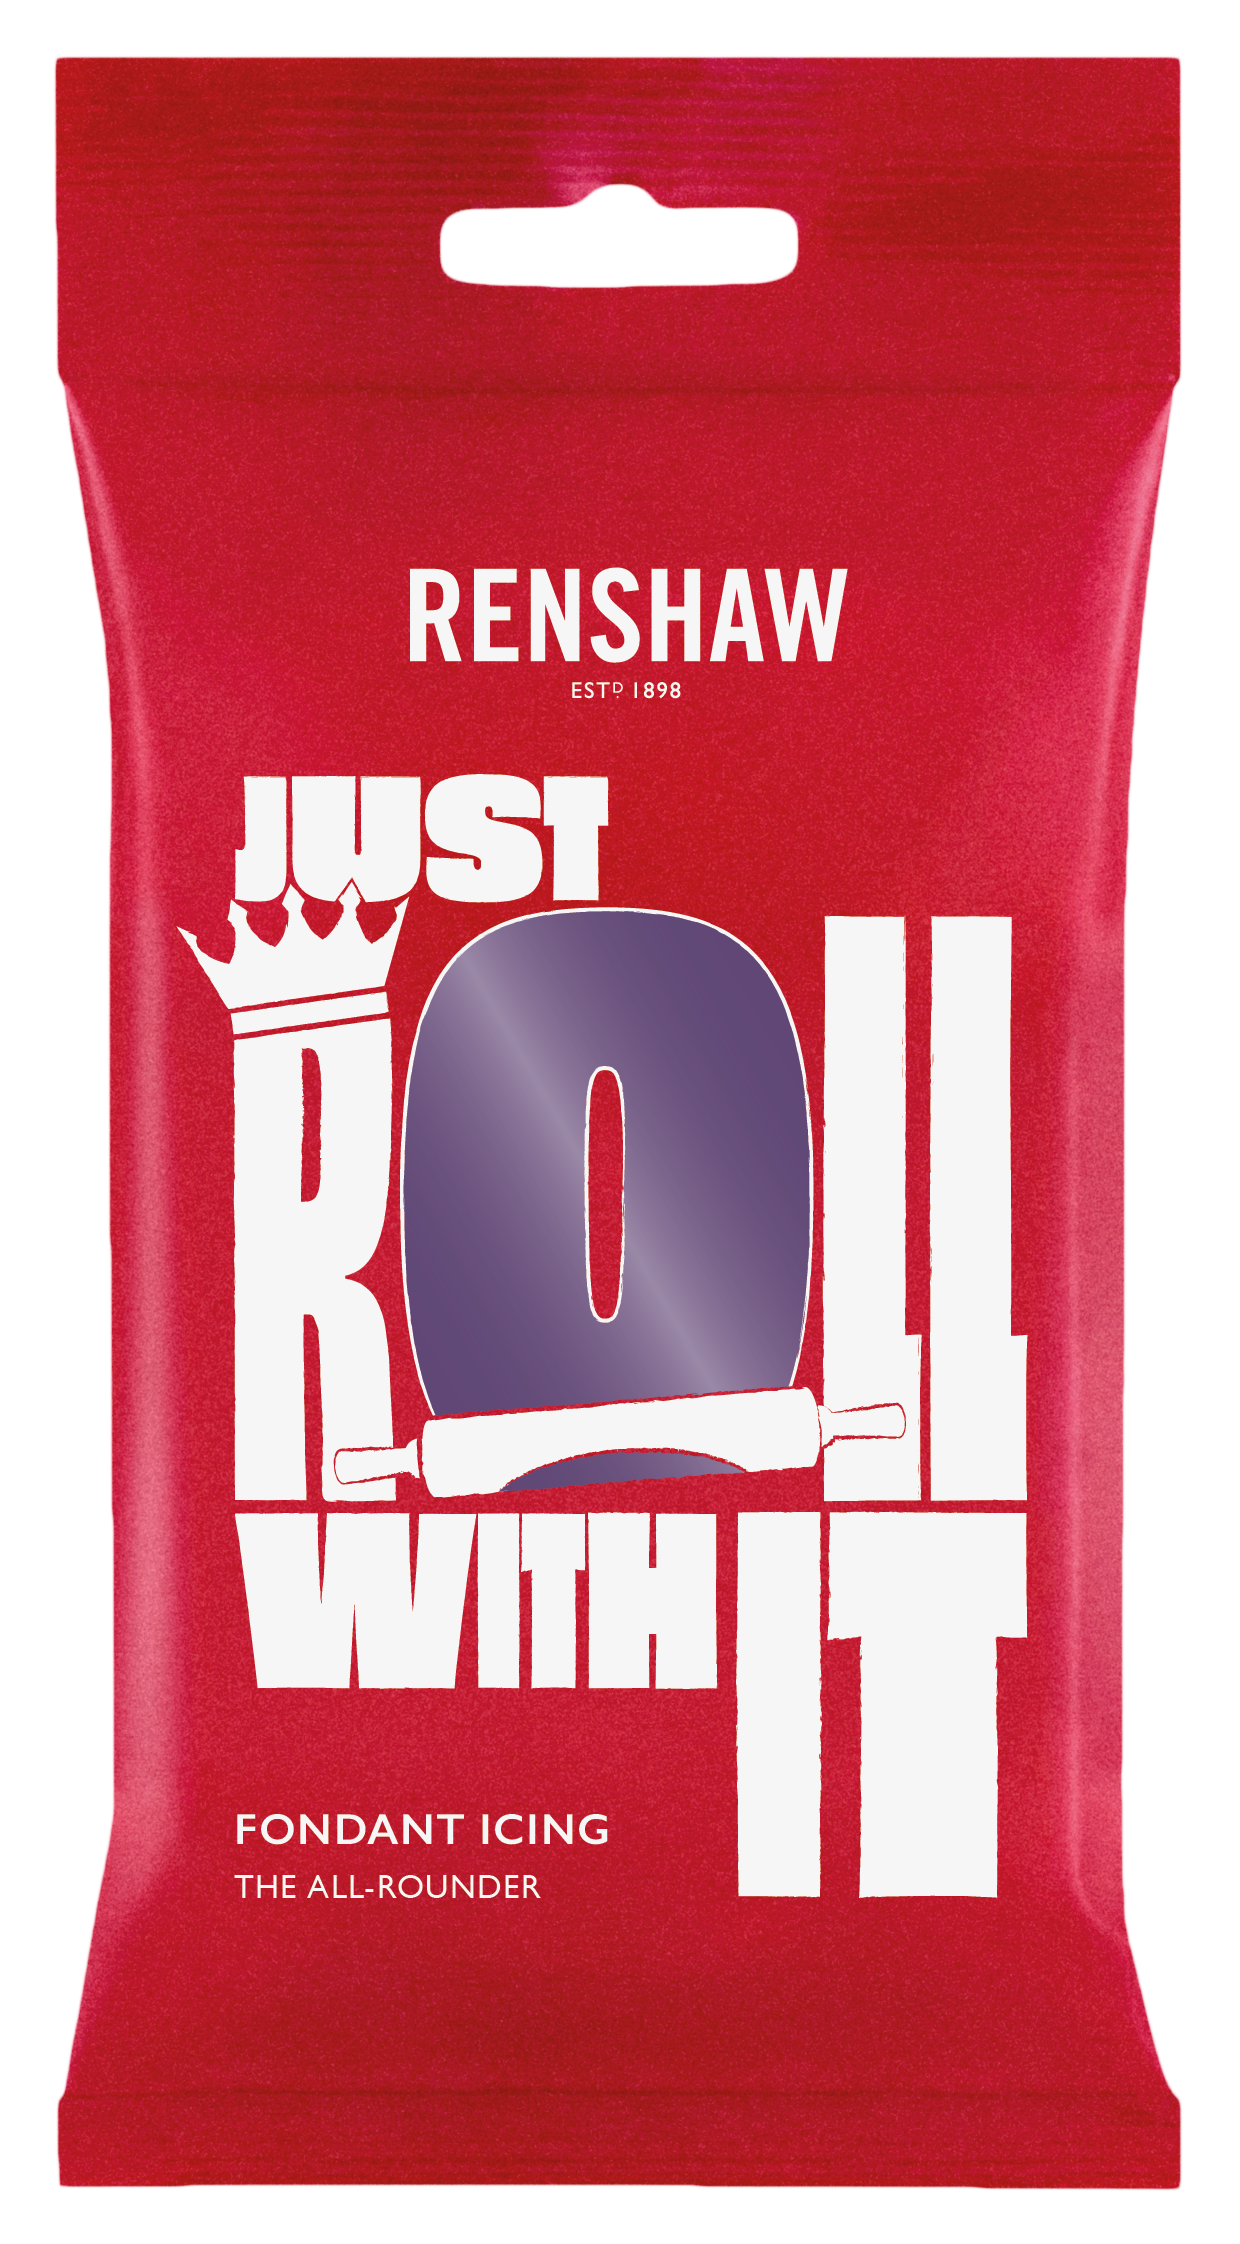 Deep Purple 'Just Roll With It' Fondant Icing